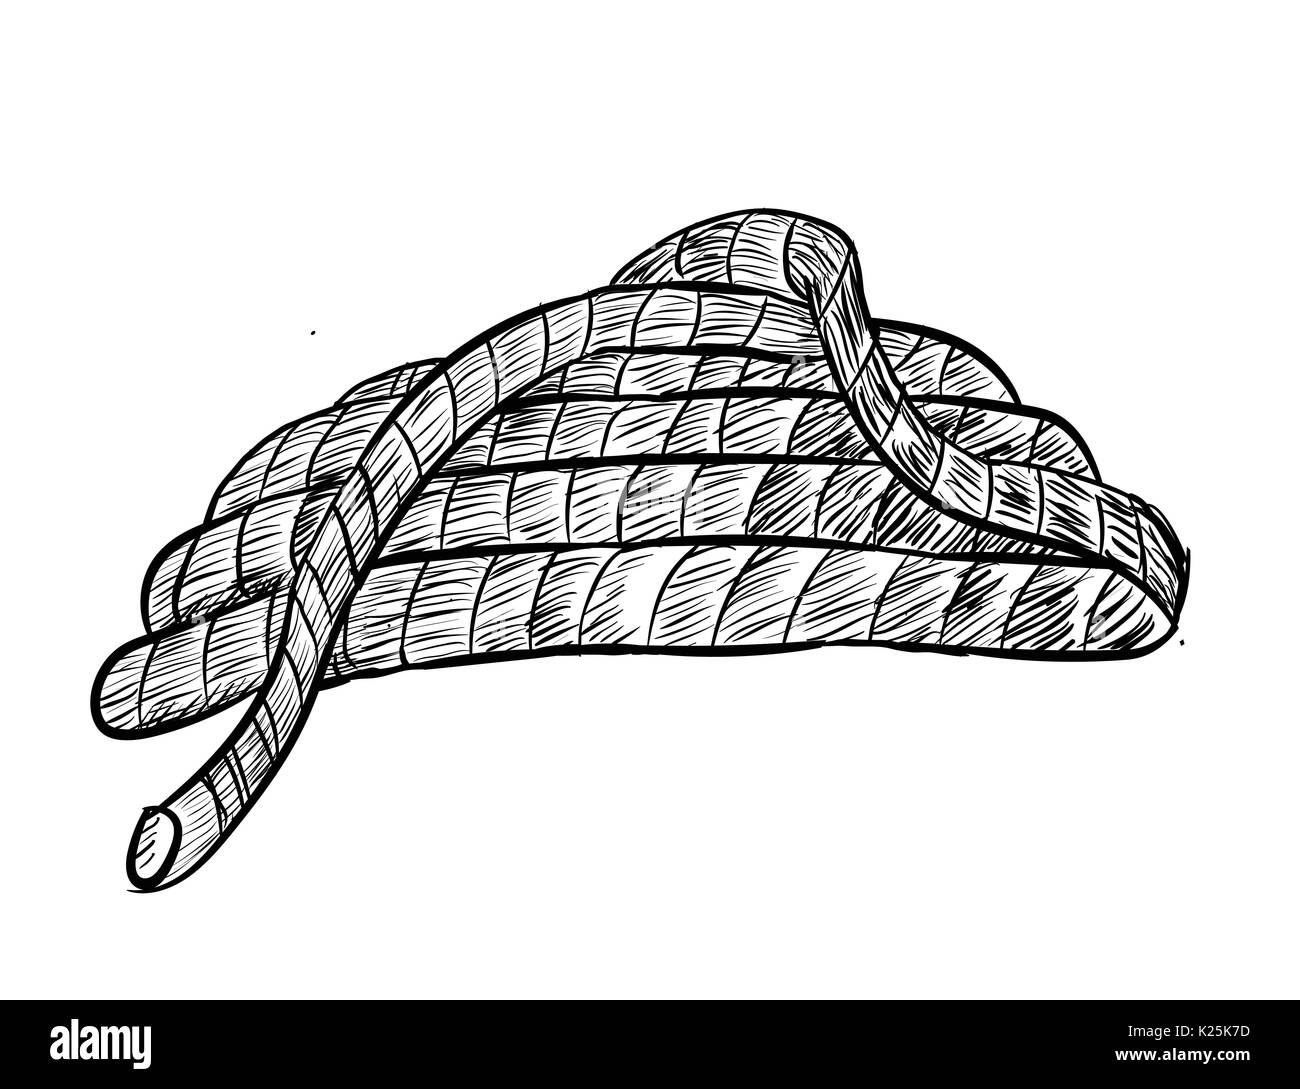 https://c8.alamy.com/comp/K25K7D/hand-drawing-of-rope-on-white-background-black-and-white-simple-line-K25K7D.jpg